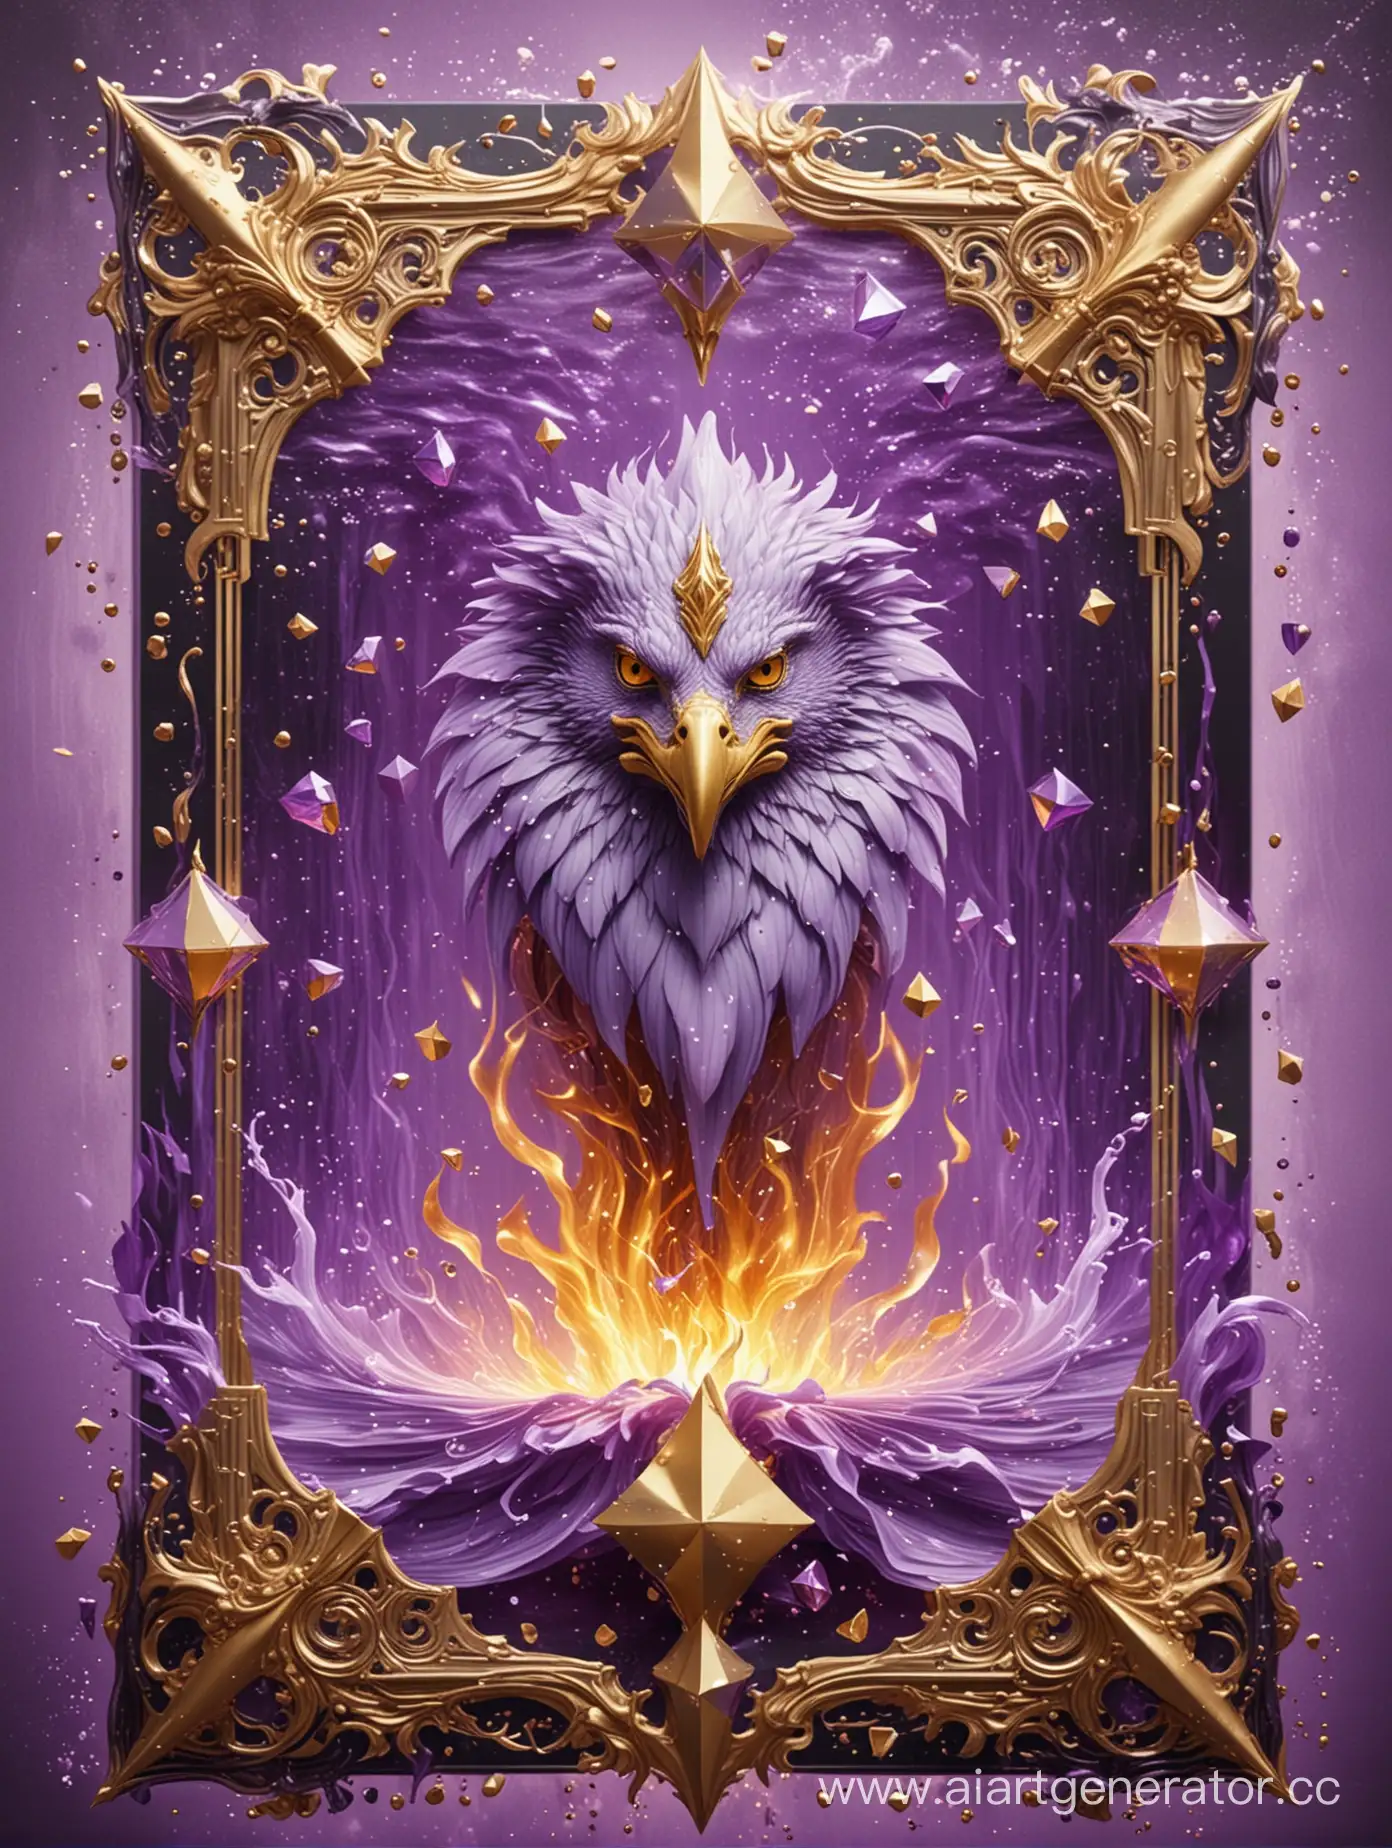 Futuristic-Geometric-Fire-and-Water-Tarot-Card-with-Golden-Griffin-Heads